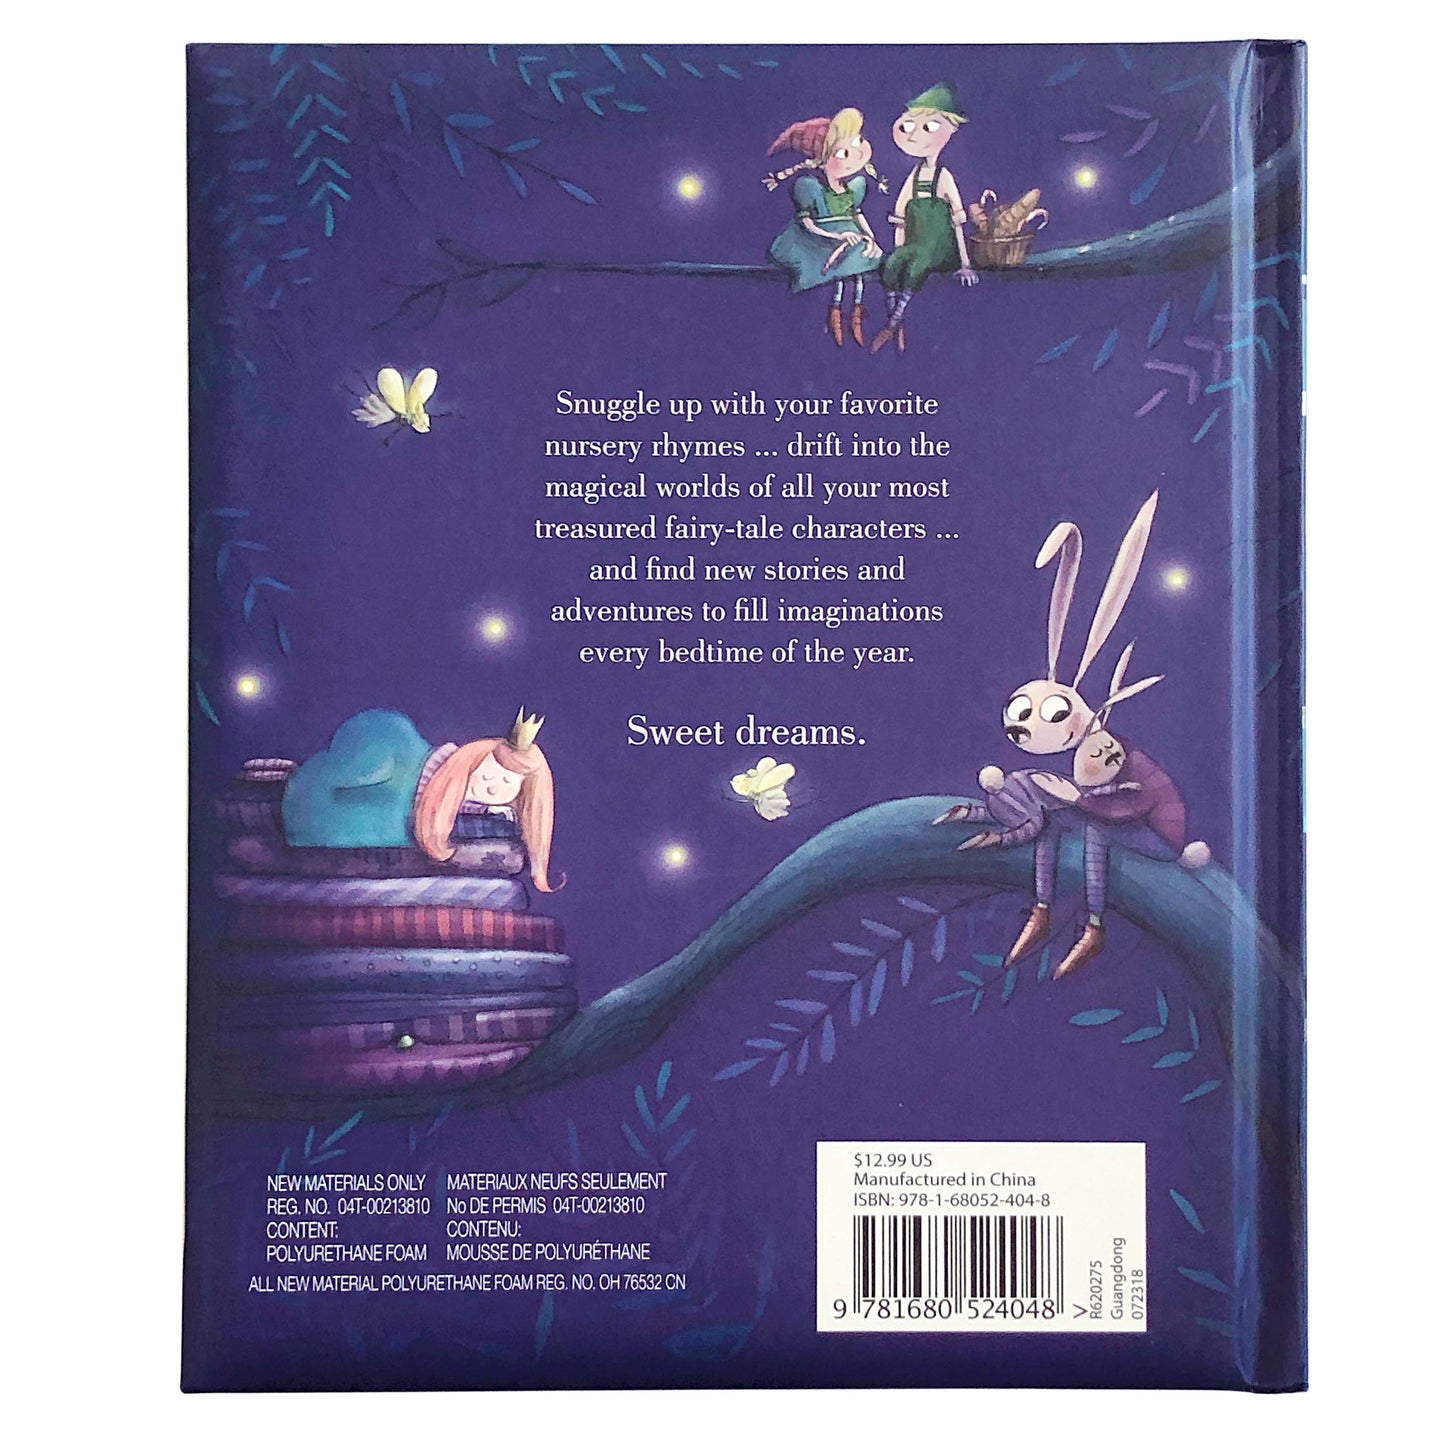 365 Bedtime Stories and Rhymes Hardcover Kids Book – Illustrated